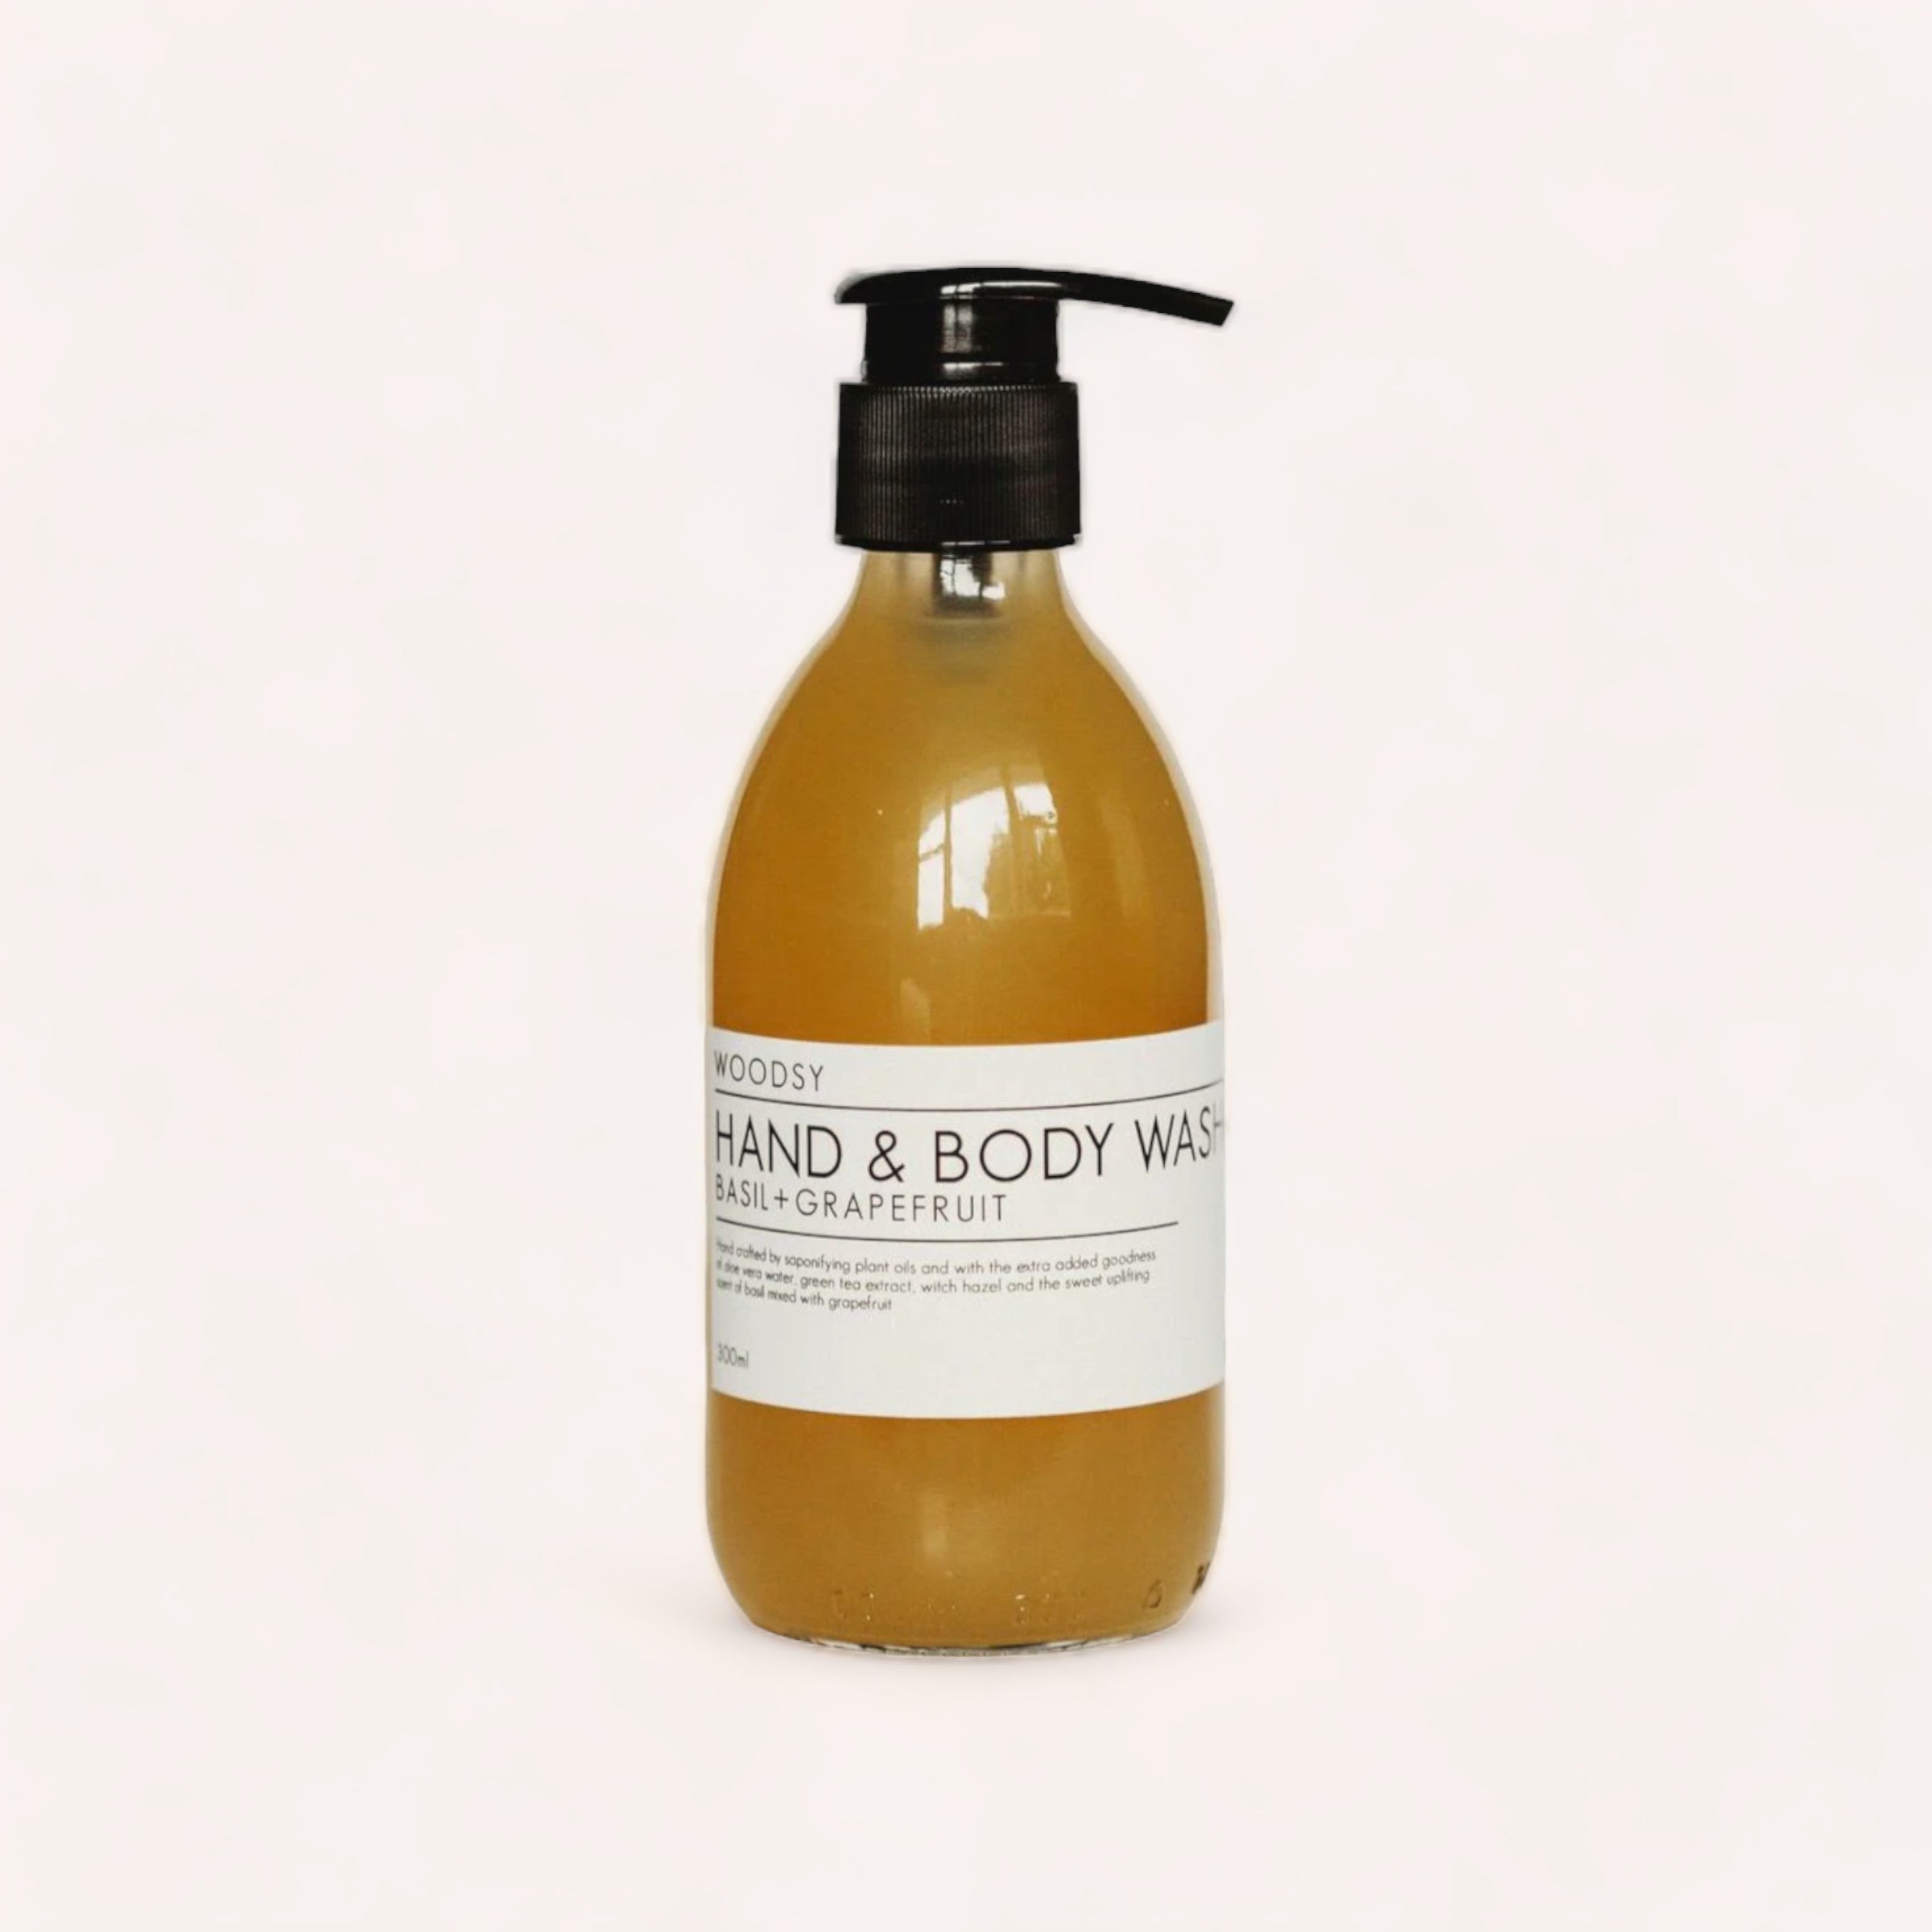 A pump bottle of Hand & Body Wash - Basil & Grapefruit by Woodsy Botanics with a label that indicates it's a woodsy, basil grapefruit-scented product containing organic oils.